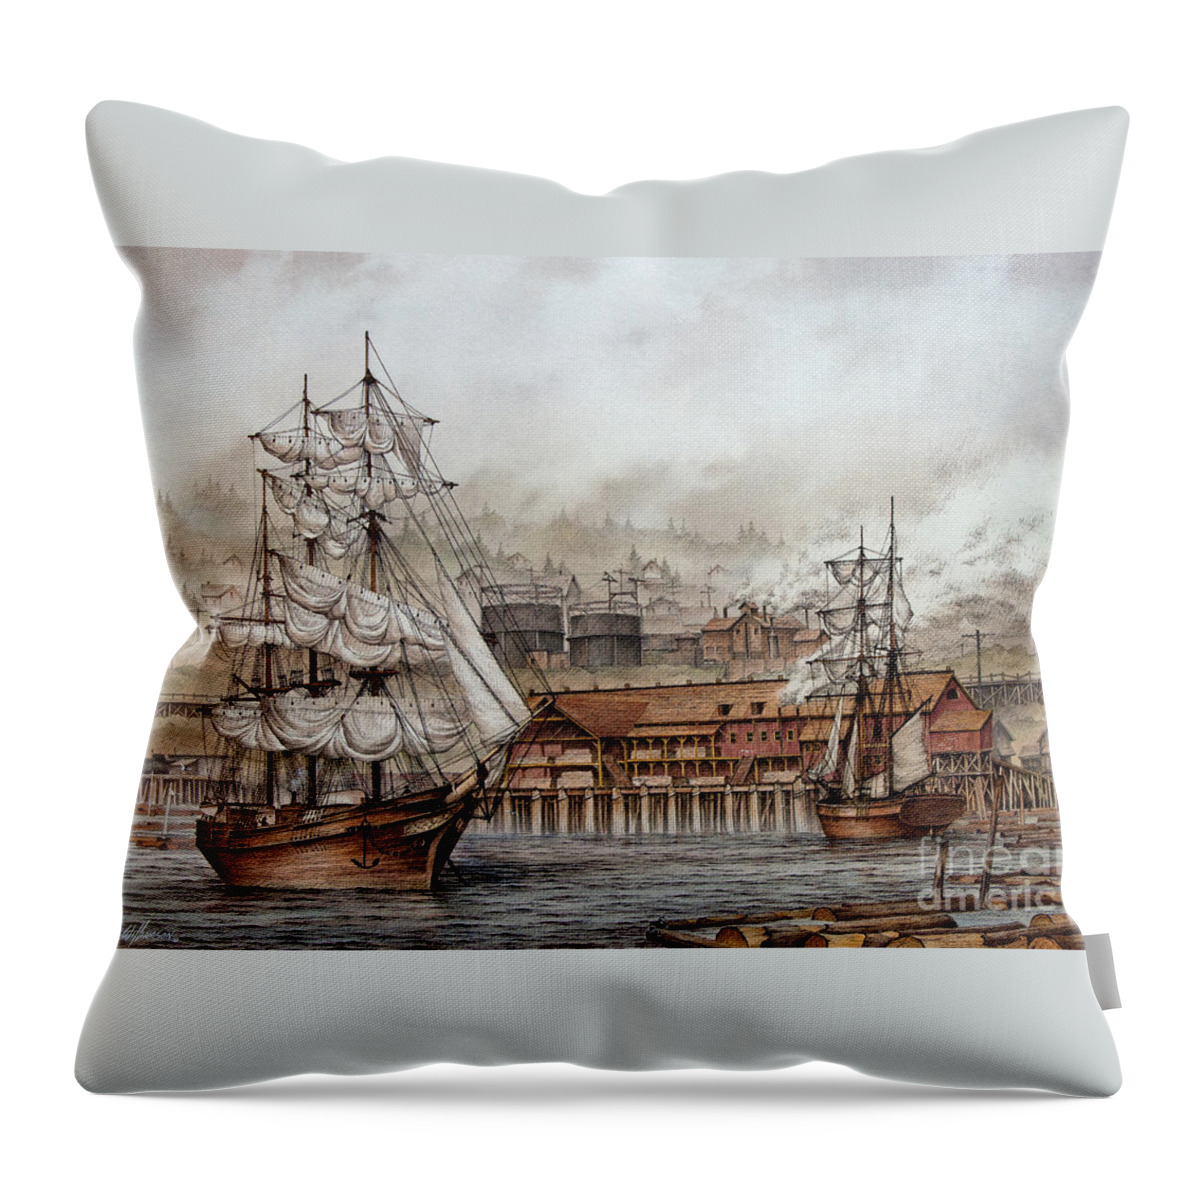 E K Wood Throw Pillow featuring the painting E. K. Wood Lumber Mill by James Williamson